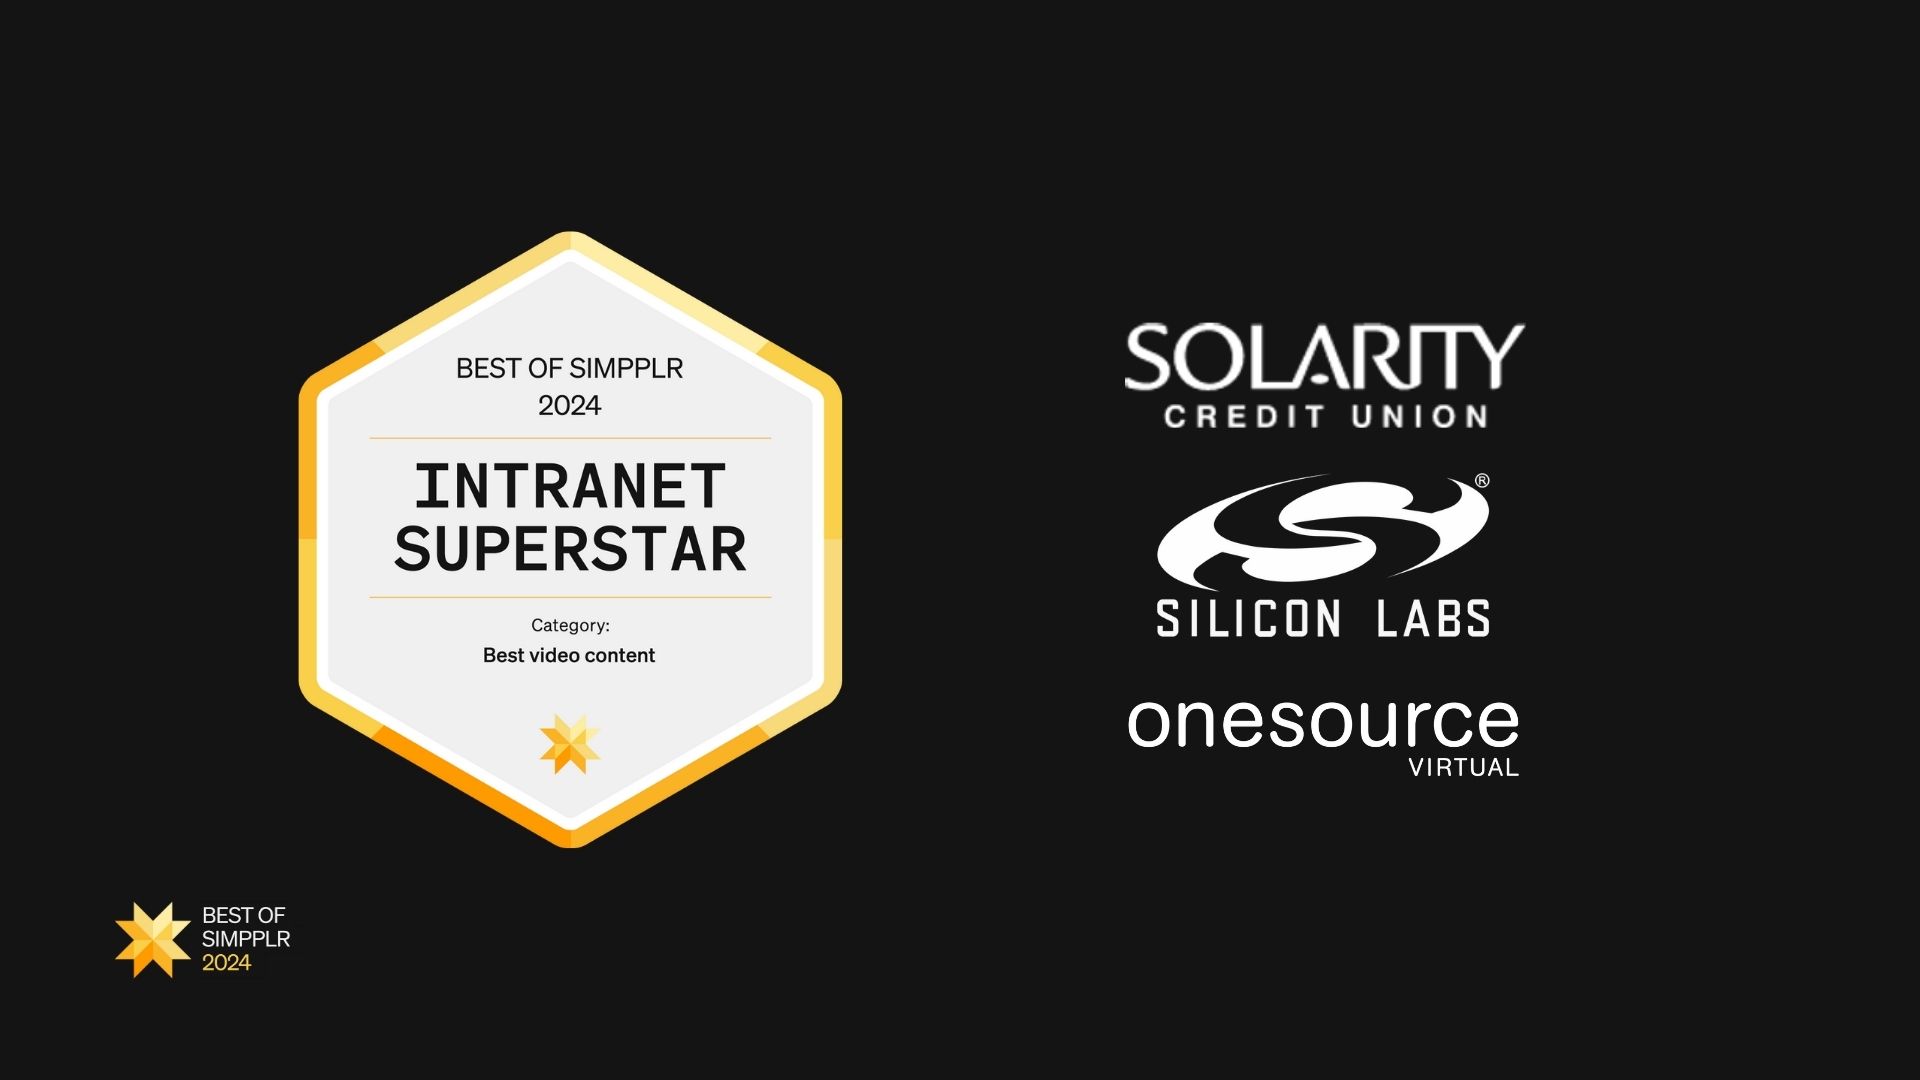 Best of Simpplr 2024 intranet contest winners - Best video content: Solarity Credit Union, Silicon Labs, OneSource Virtual